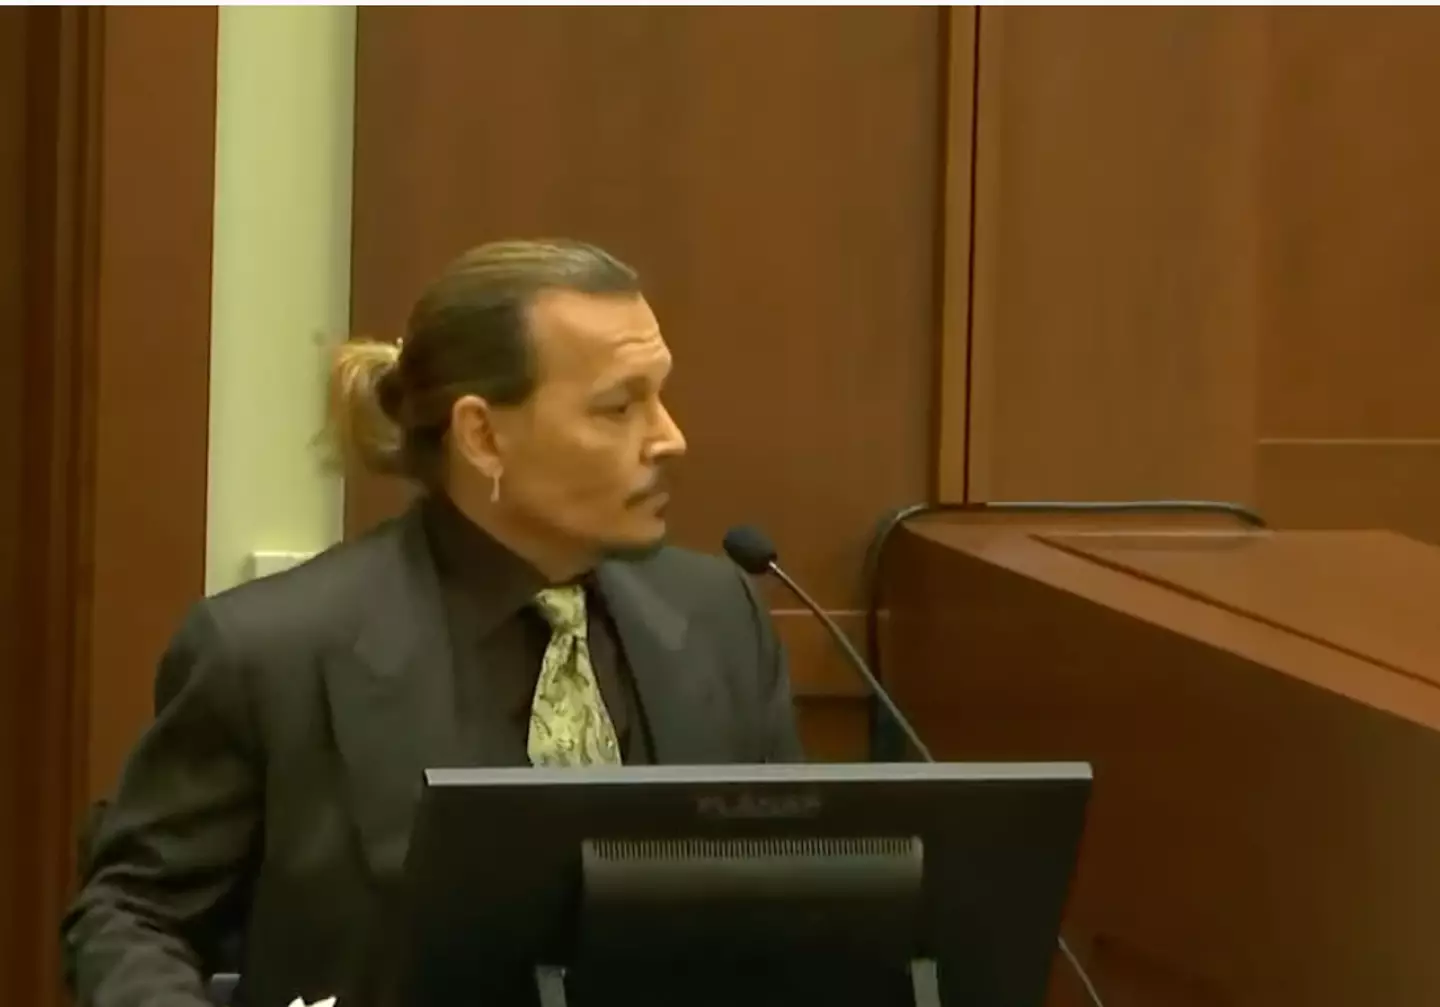 Johnny Depp took to the stand and recounted his upbringing.